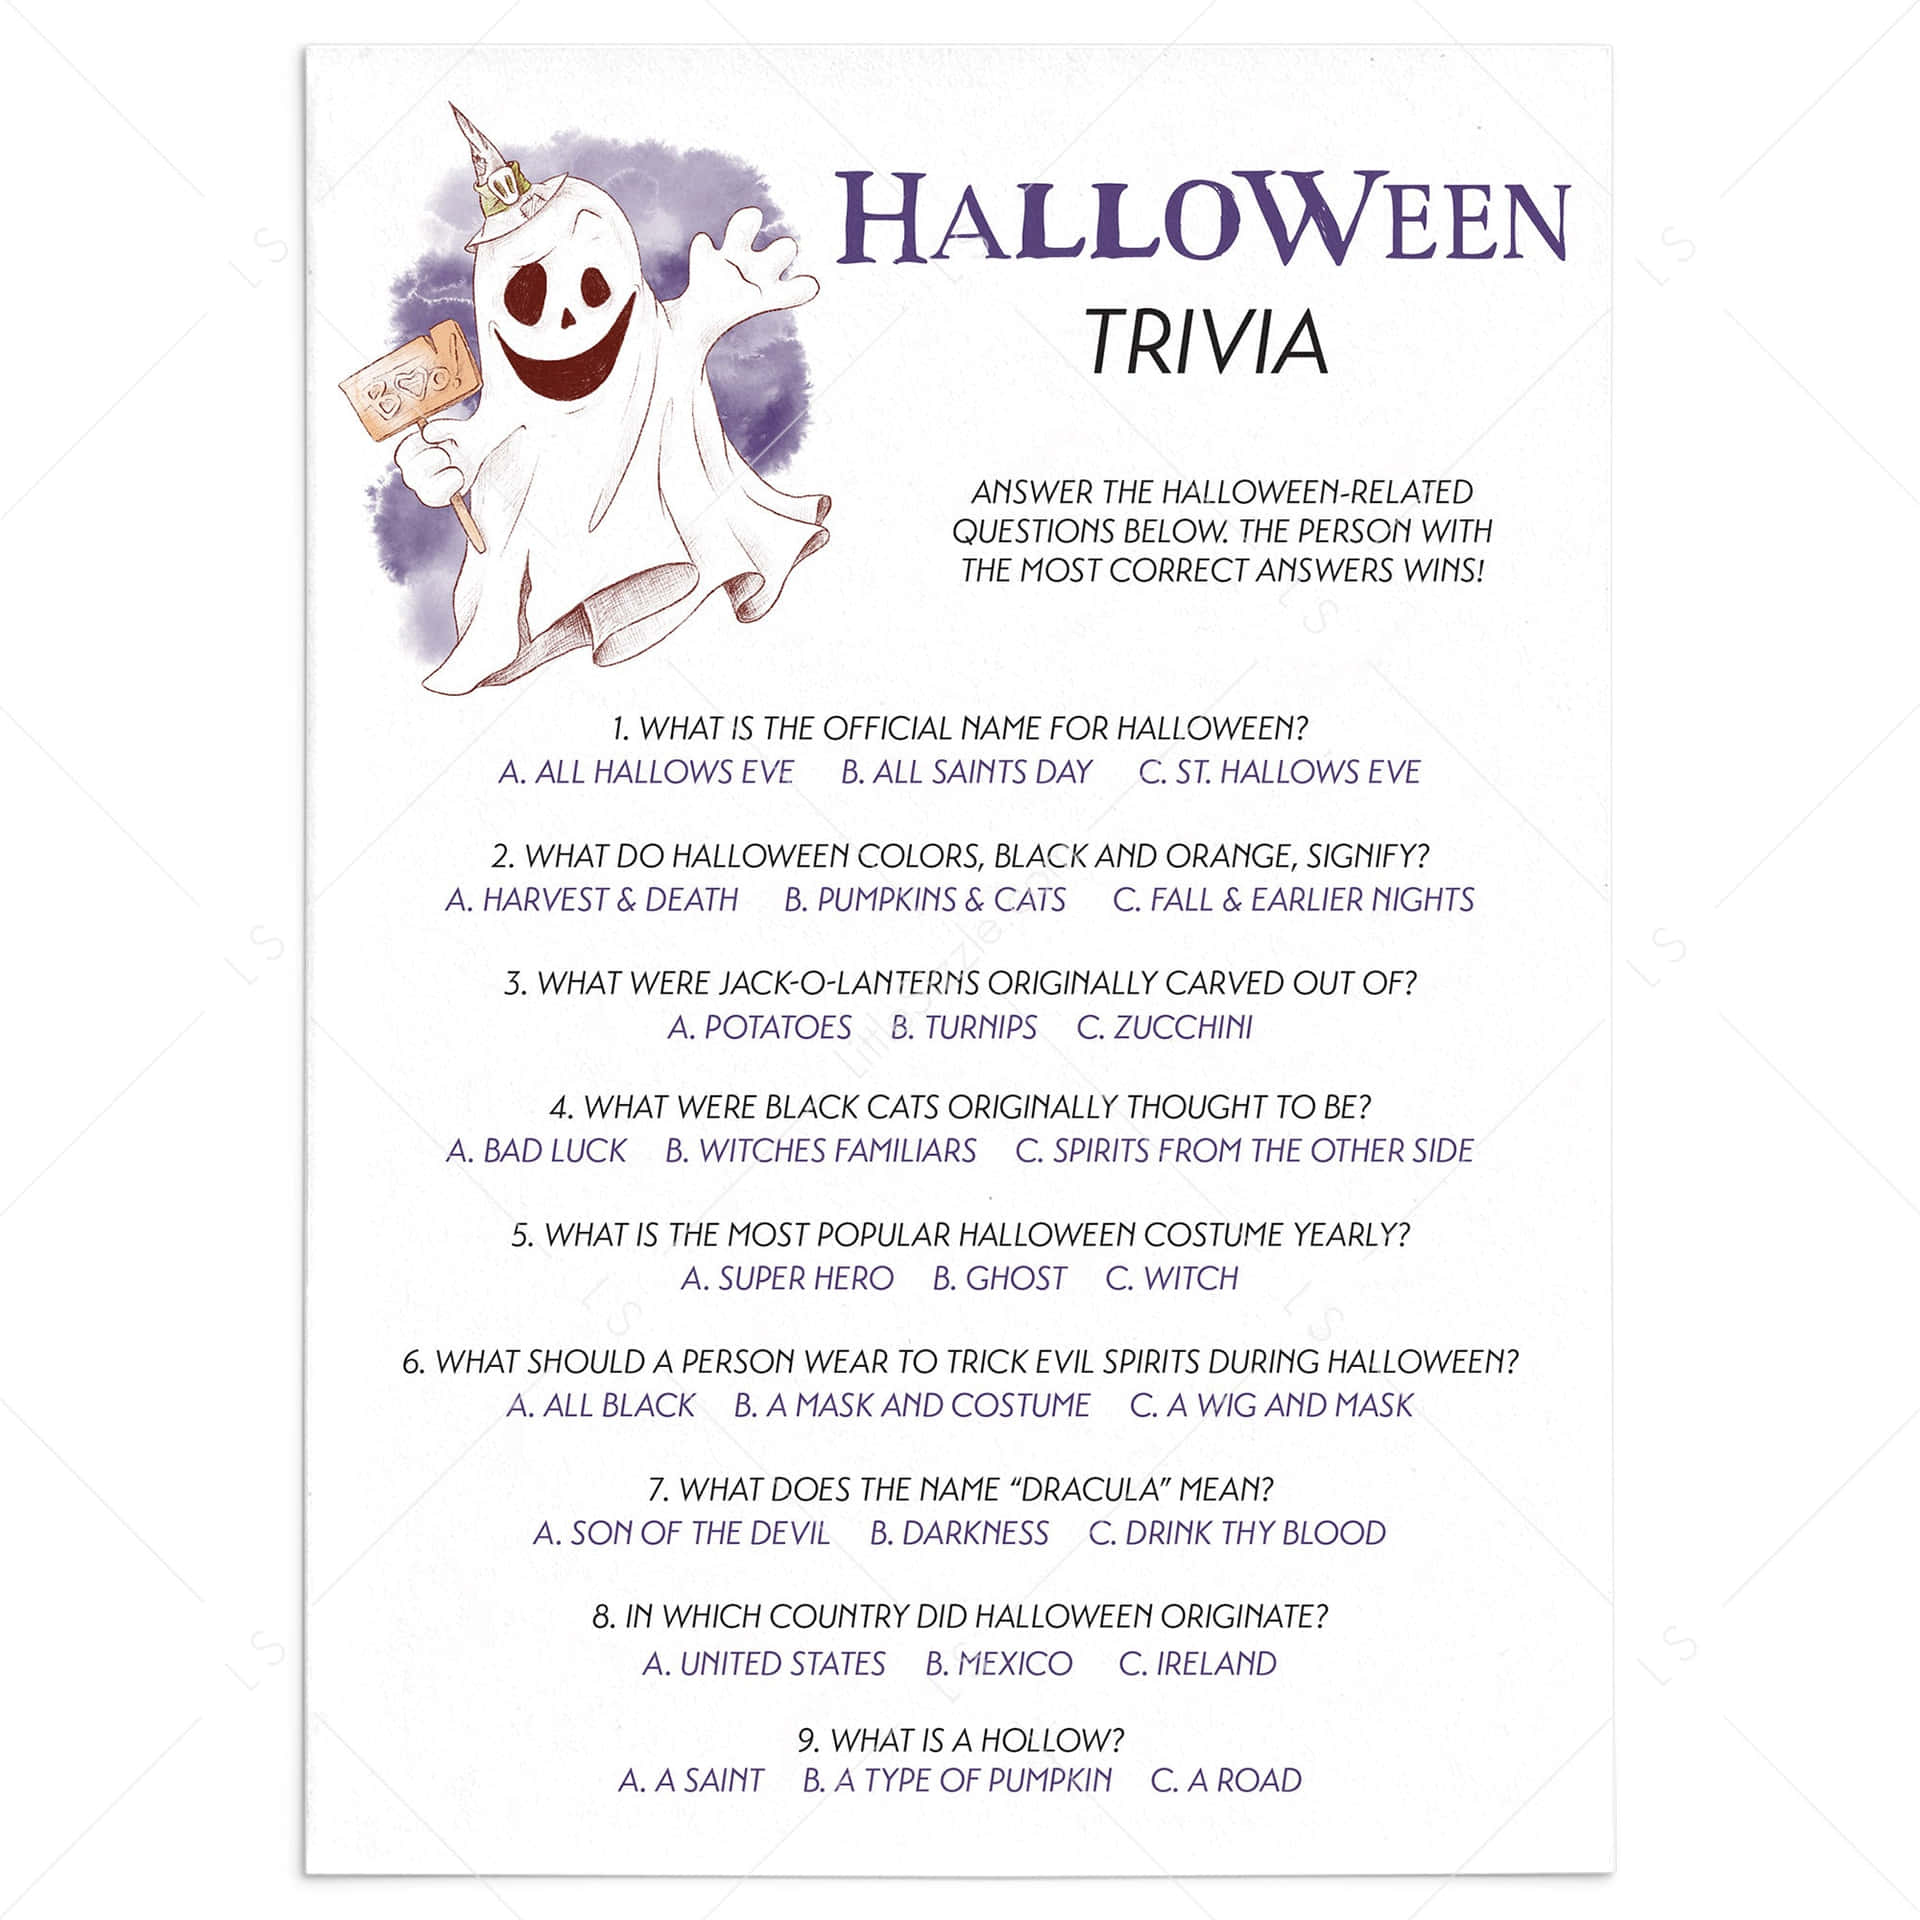 Test your knowledge with our Halloween Trivia Wallpaper